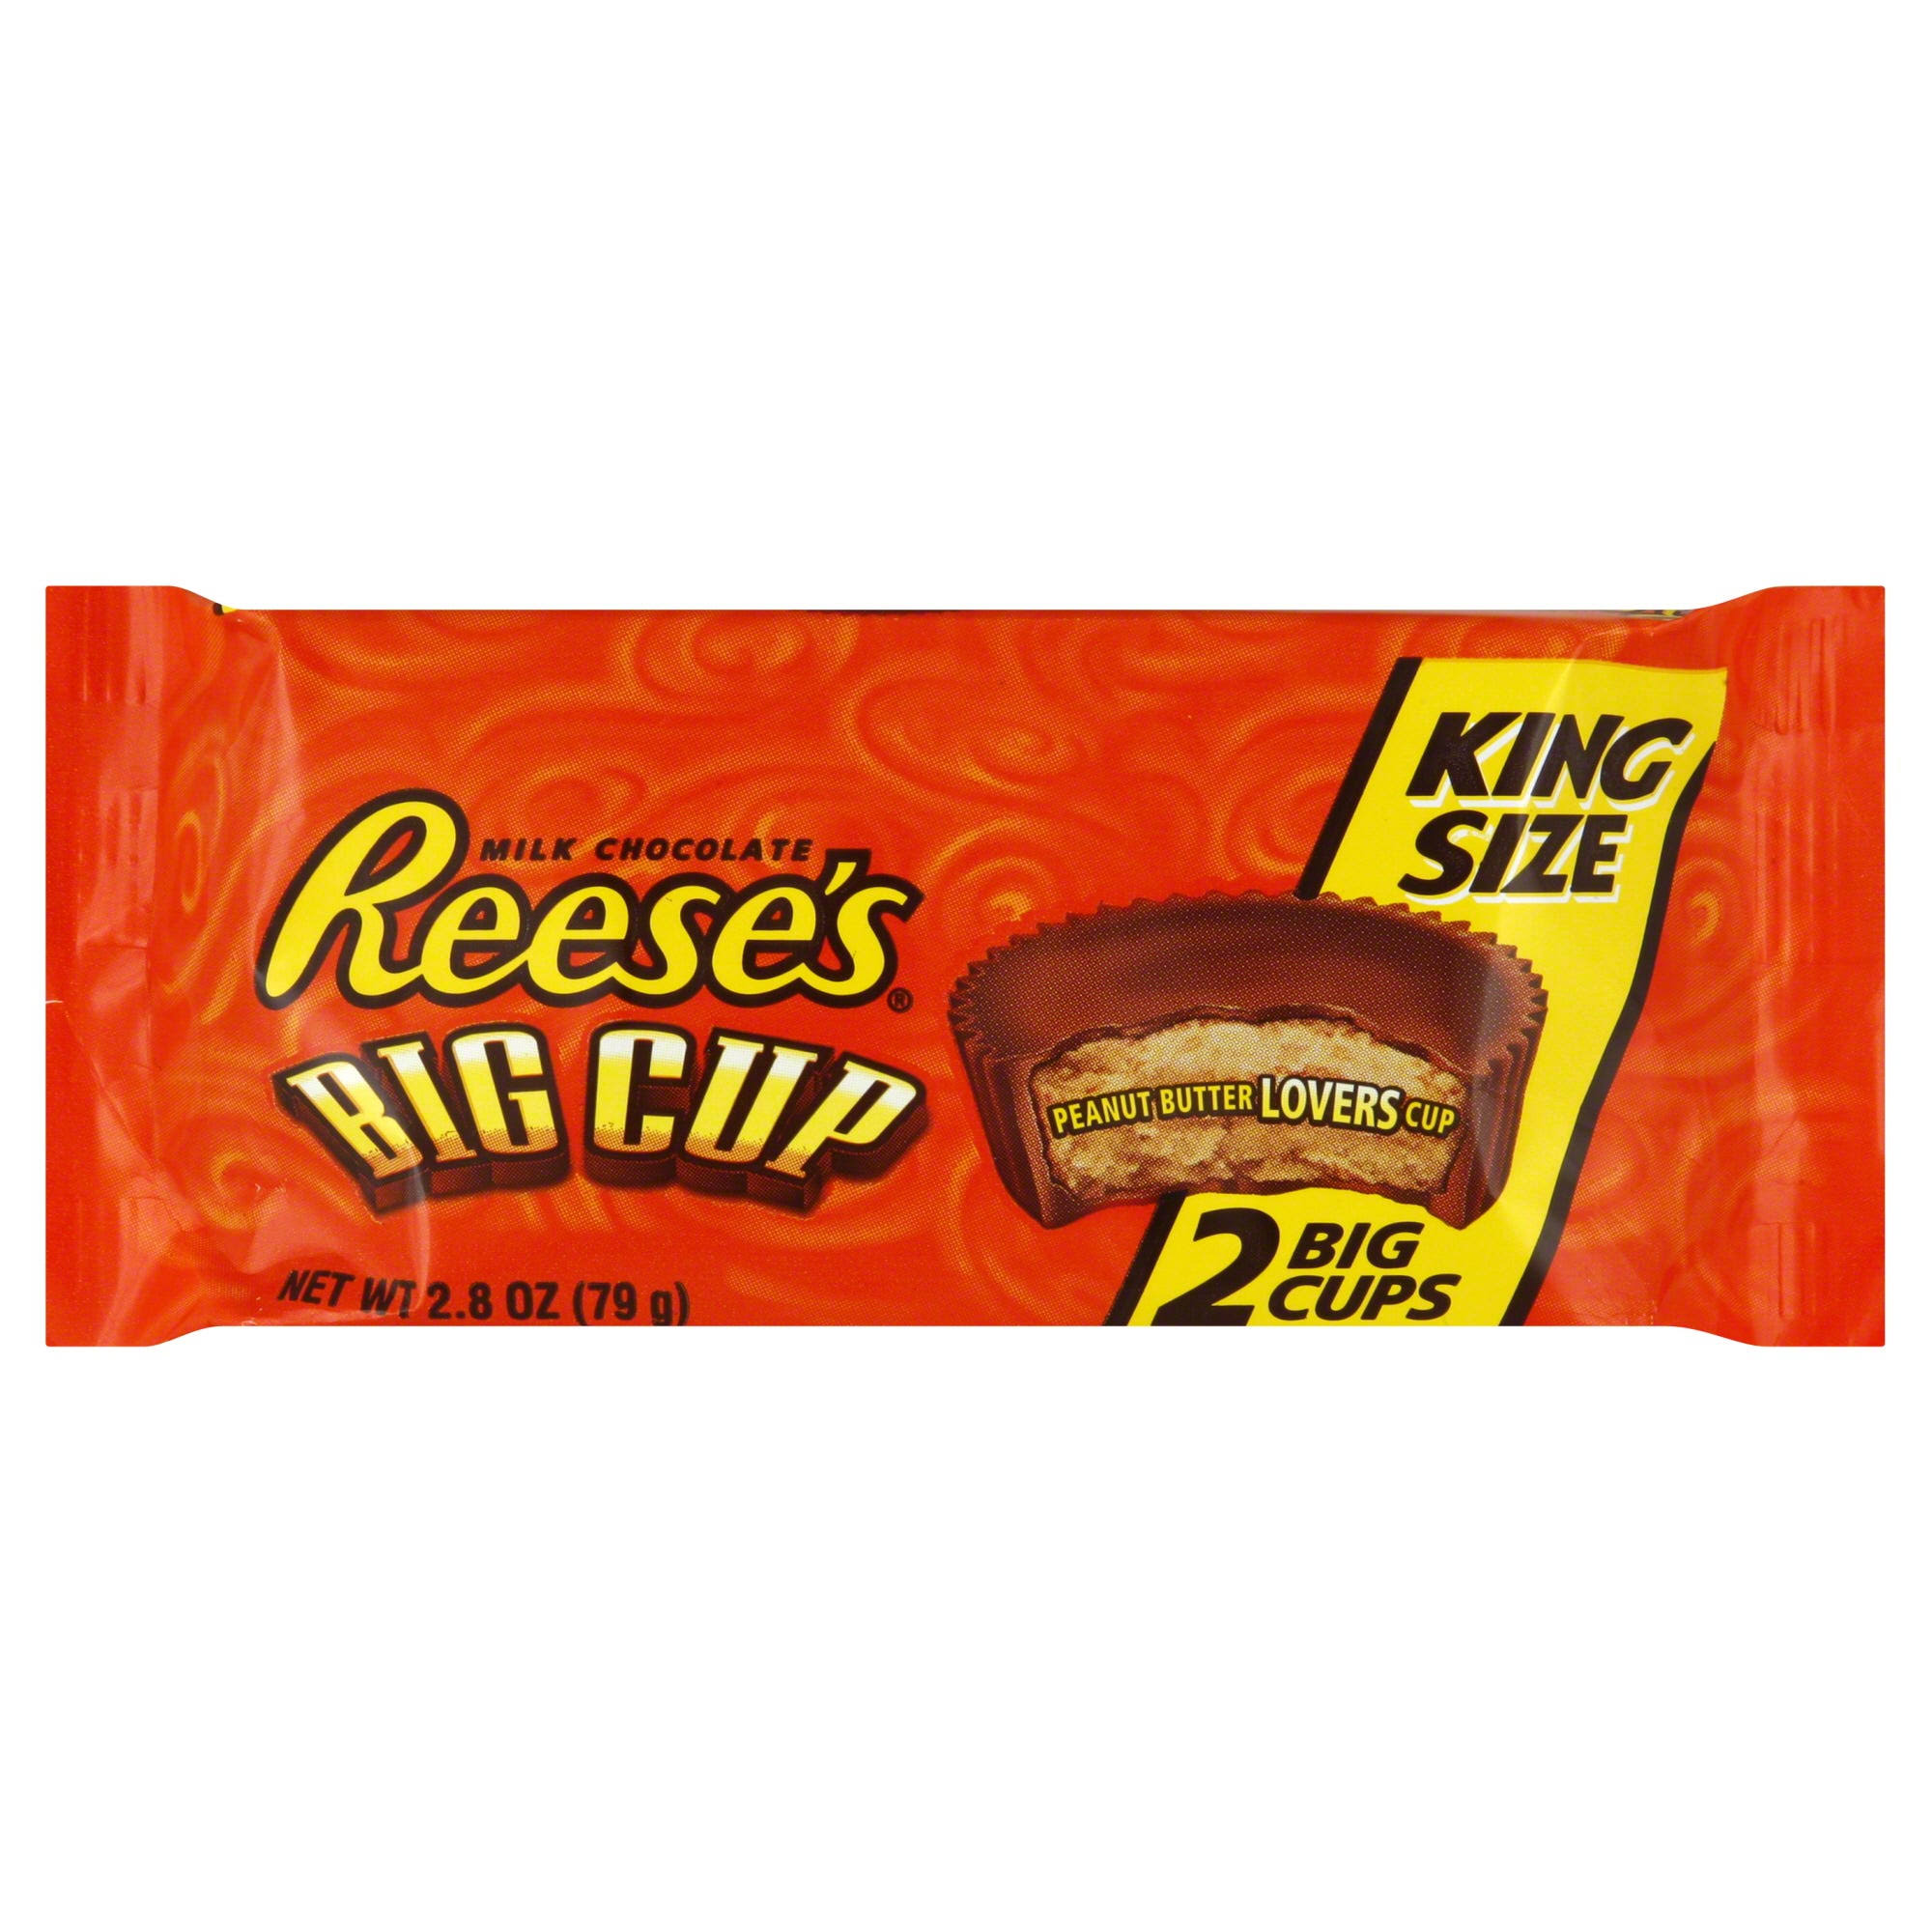 Reese's Peanut Butter Big Cup Milk Chocolate - King Size, 79g